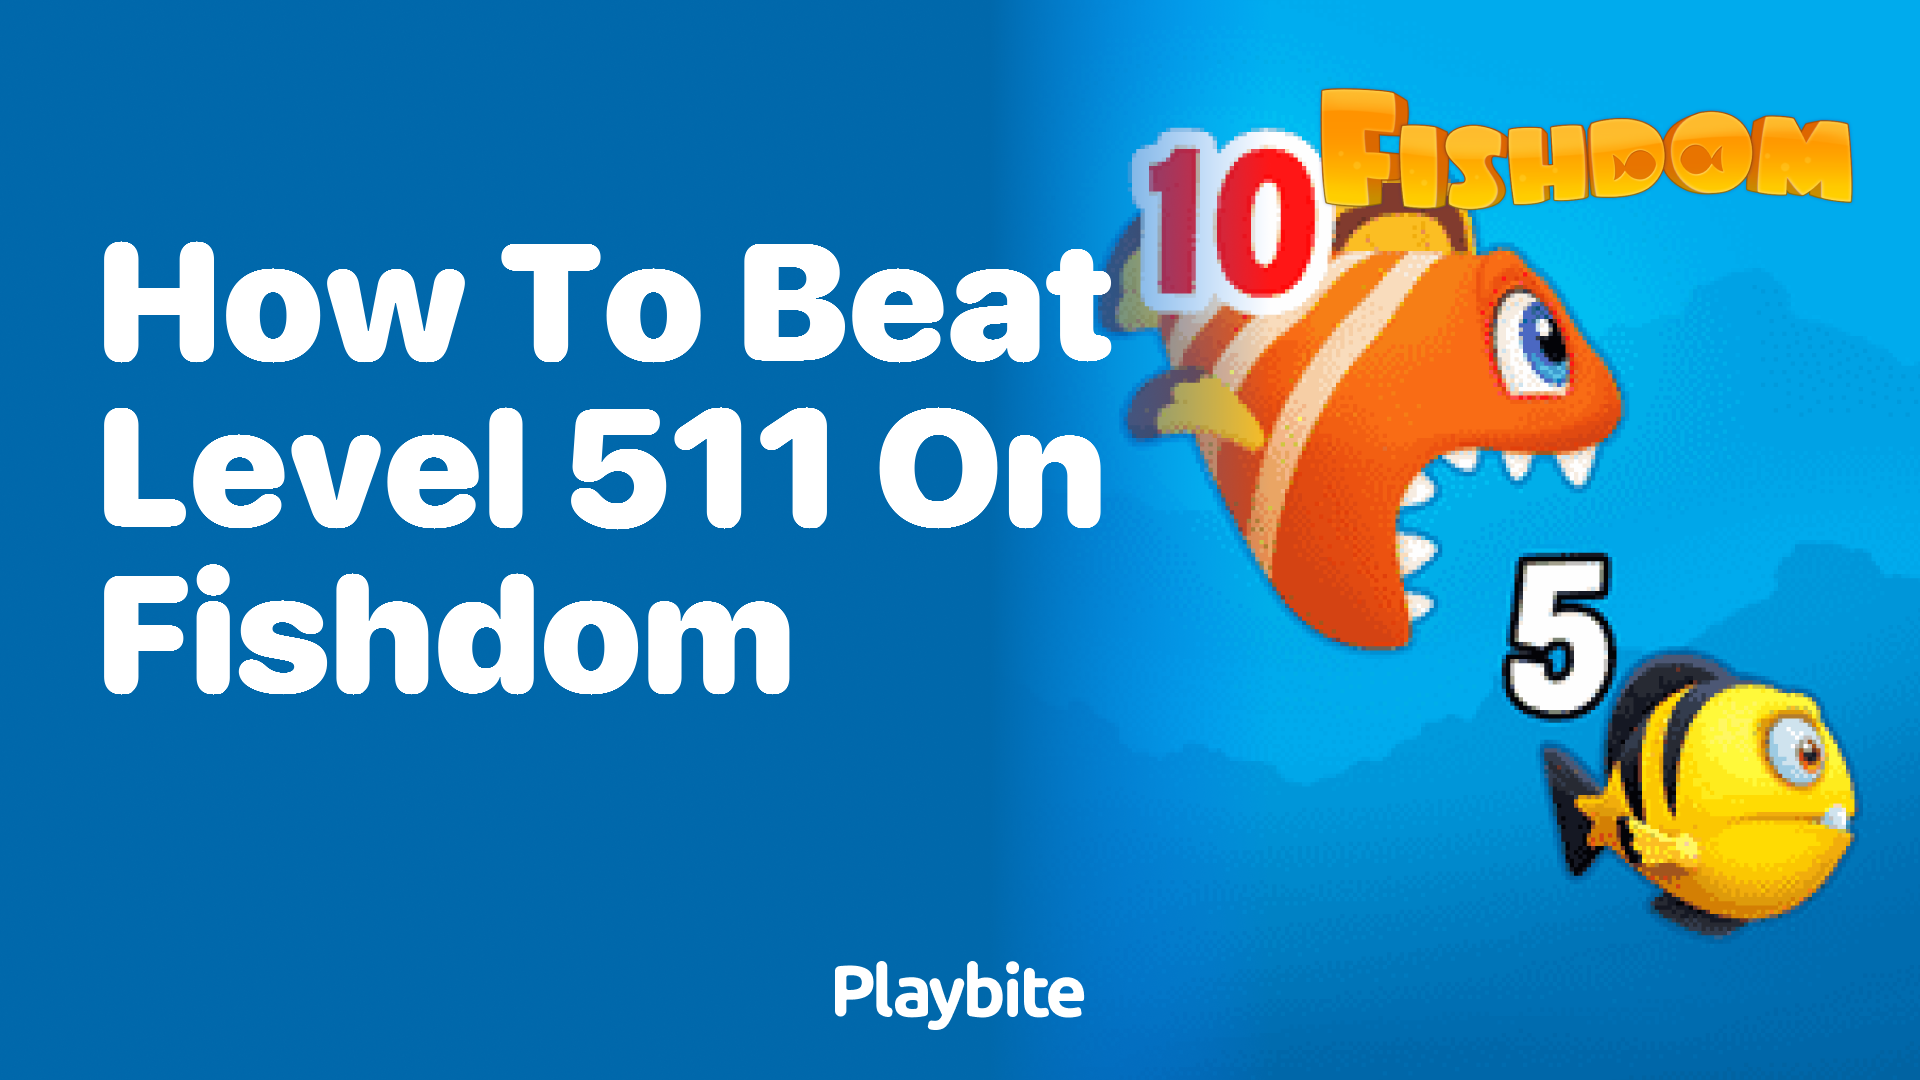 How to Beat Level 511 on Fishdom: A Step-by-Step Guide